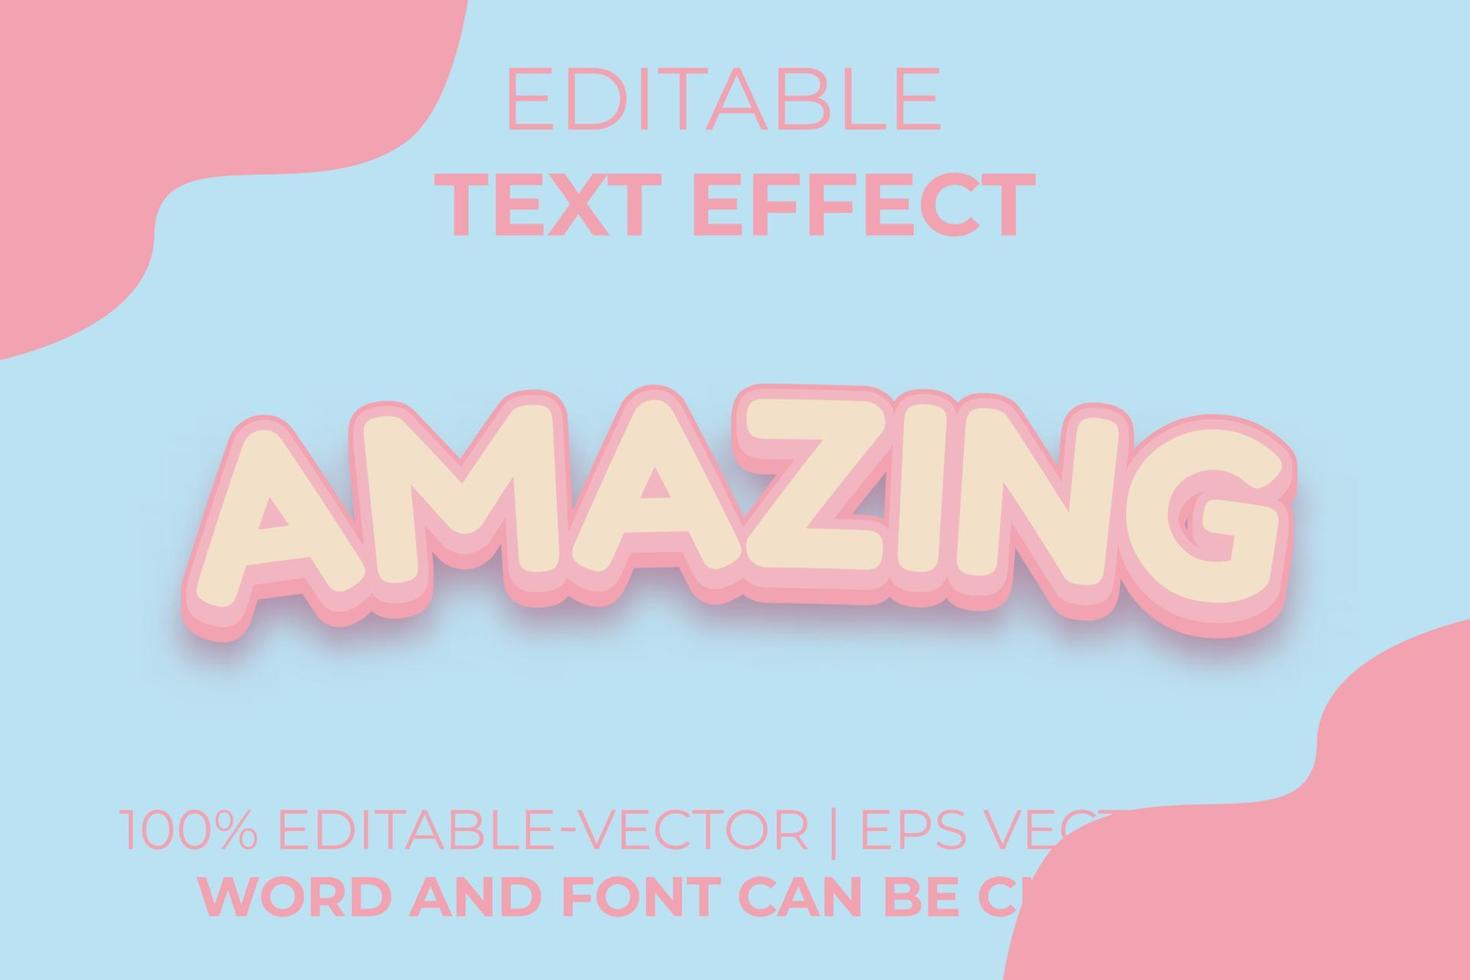 Amazing text effect, easy to edit vector